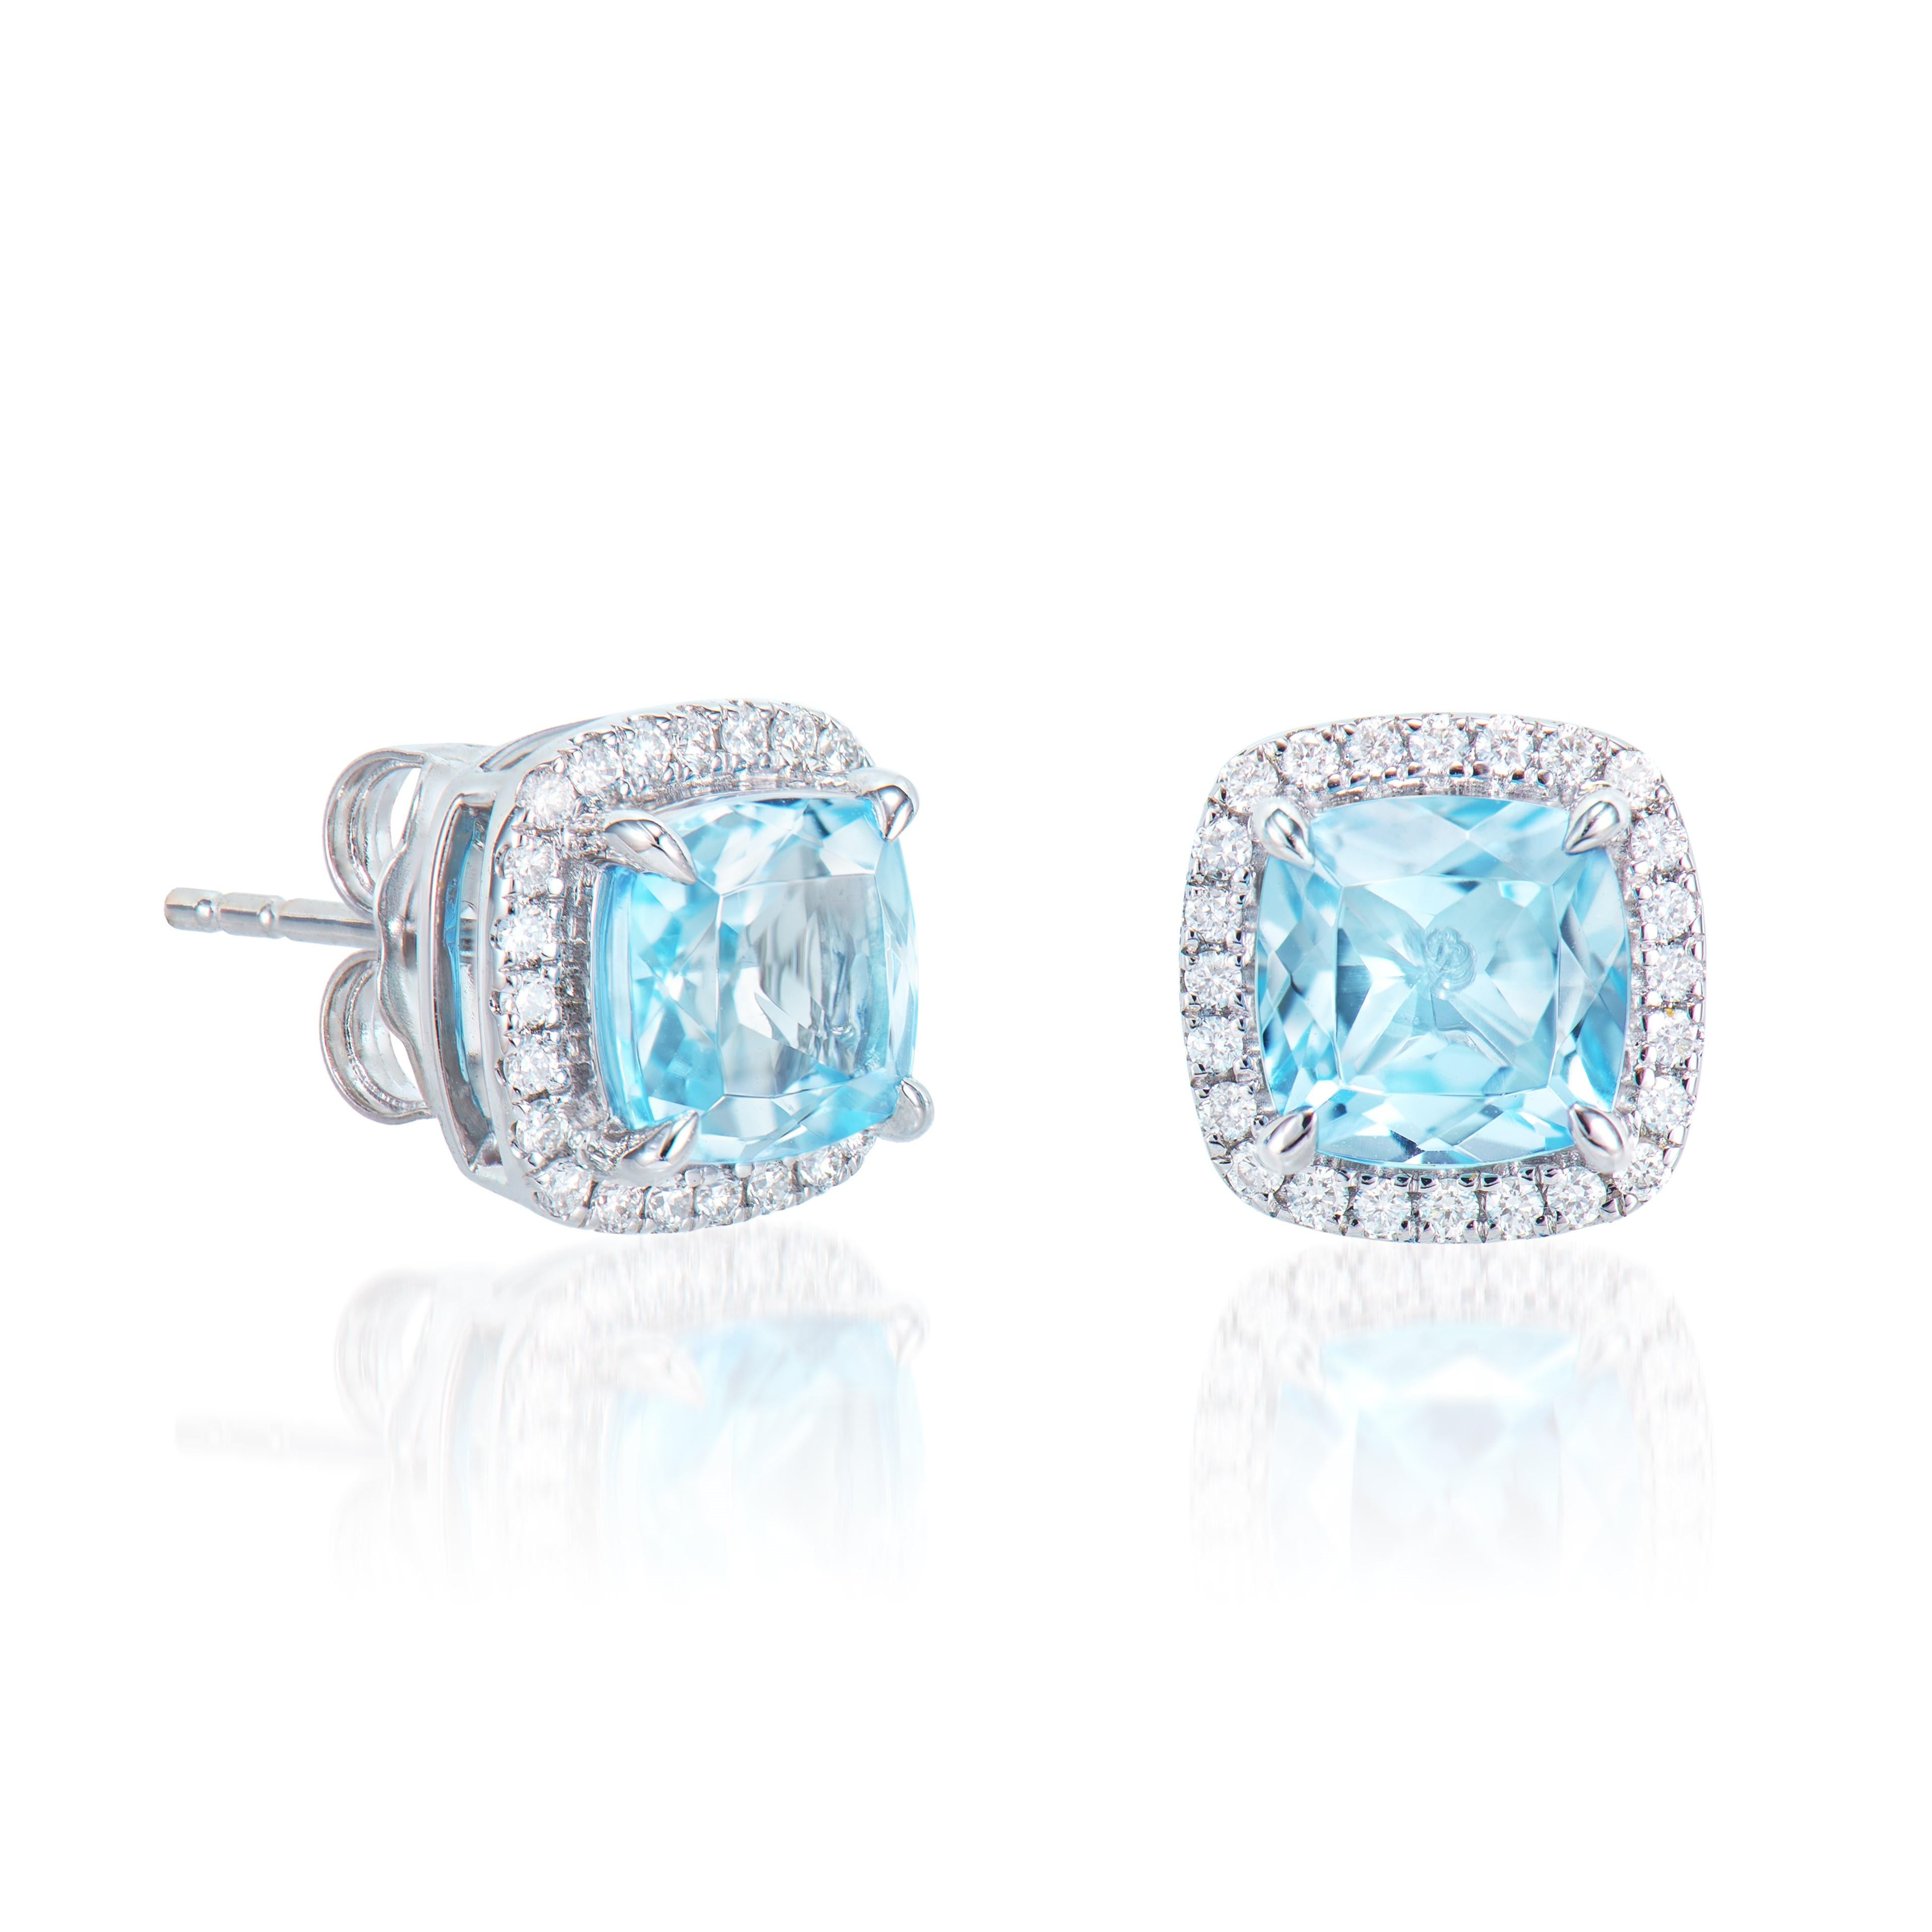 Presented A lovely collection of gems, including Amethyst, Peridot, Rhodolite, Sky Blue Topaz, Swiss Blue Topaz and Morganite is perfect for people who value quality and want to wear it to any occasion or celebration. The white gold Sky Blue Topaz